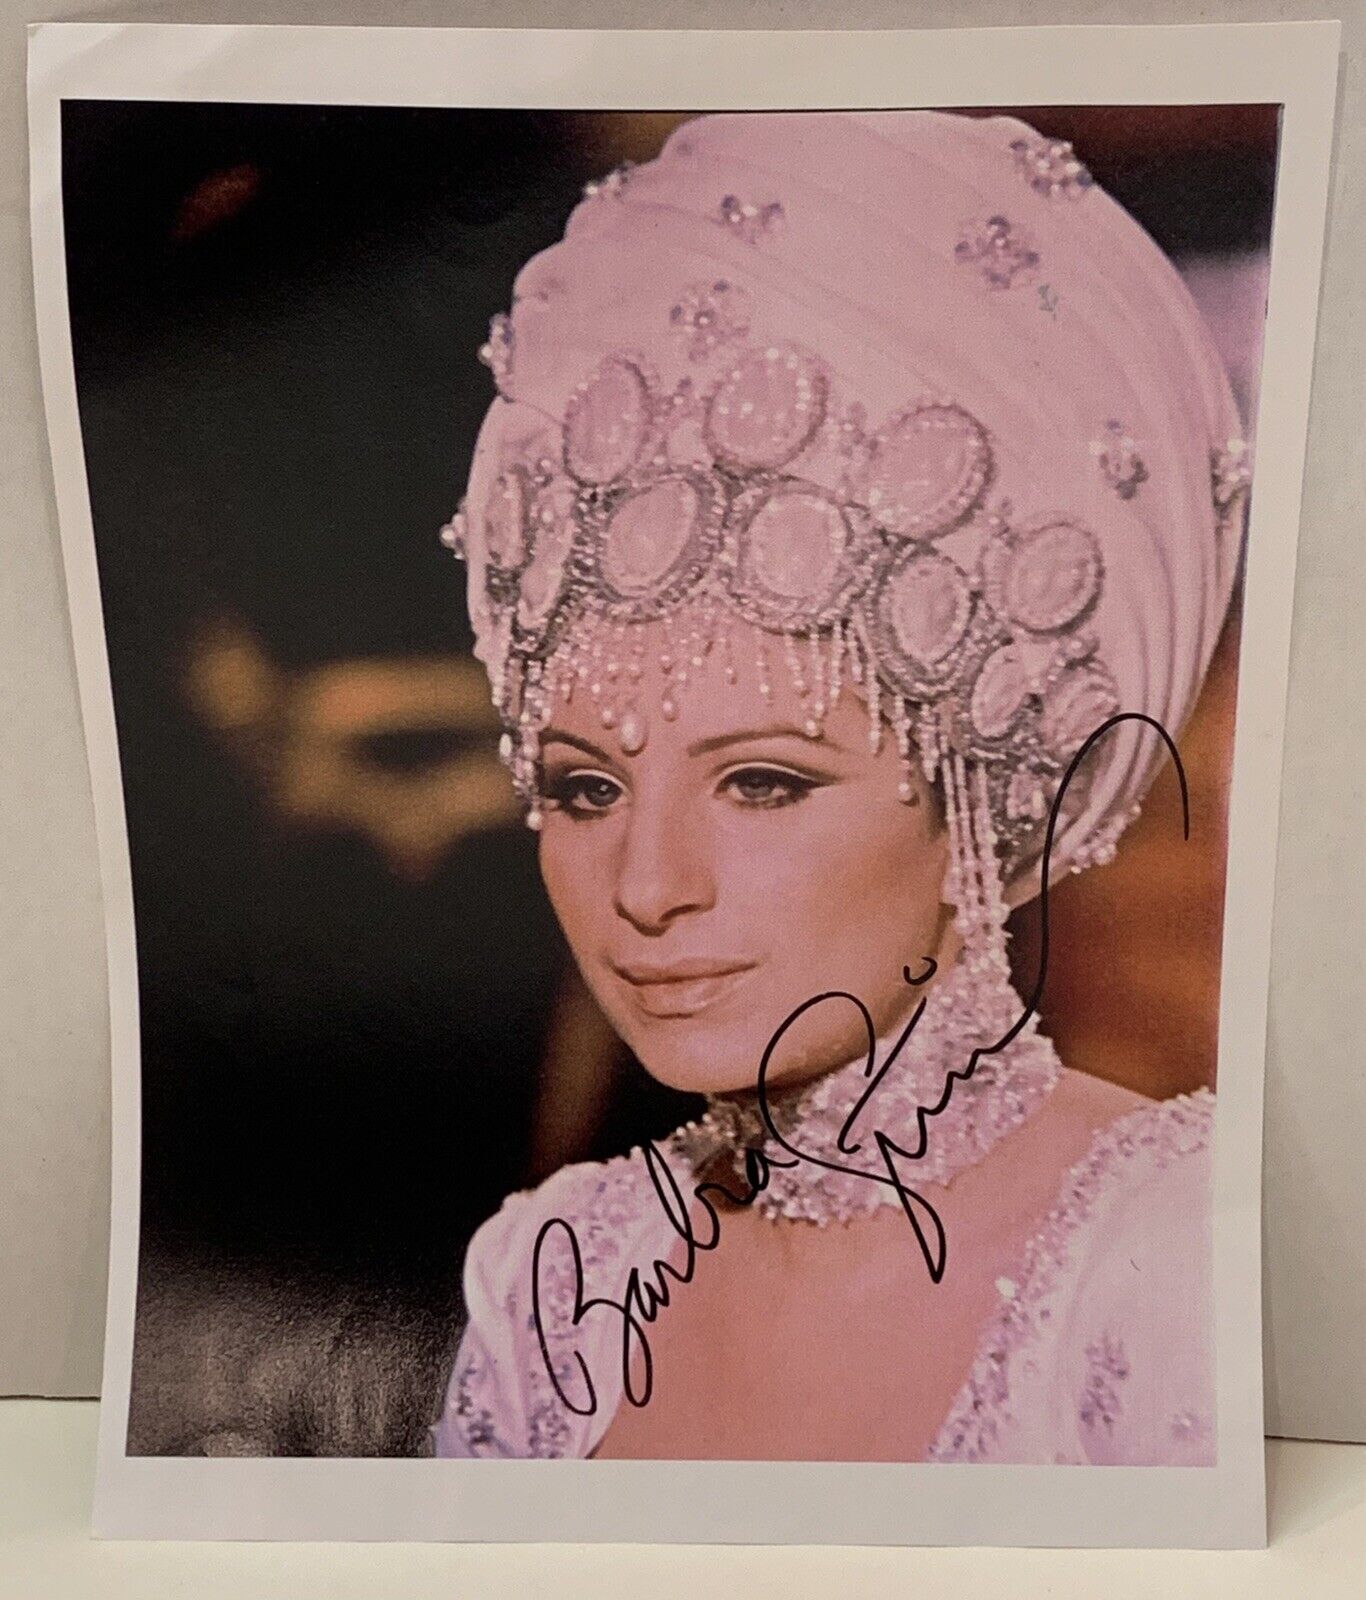 Color Copy Reproduction Barbra Streisand Clear Day w Signature Photograph 8.5x11